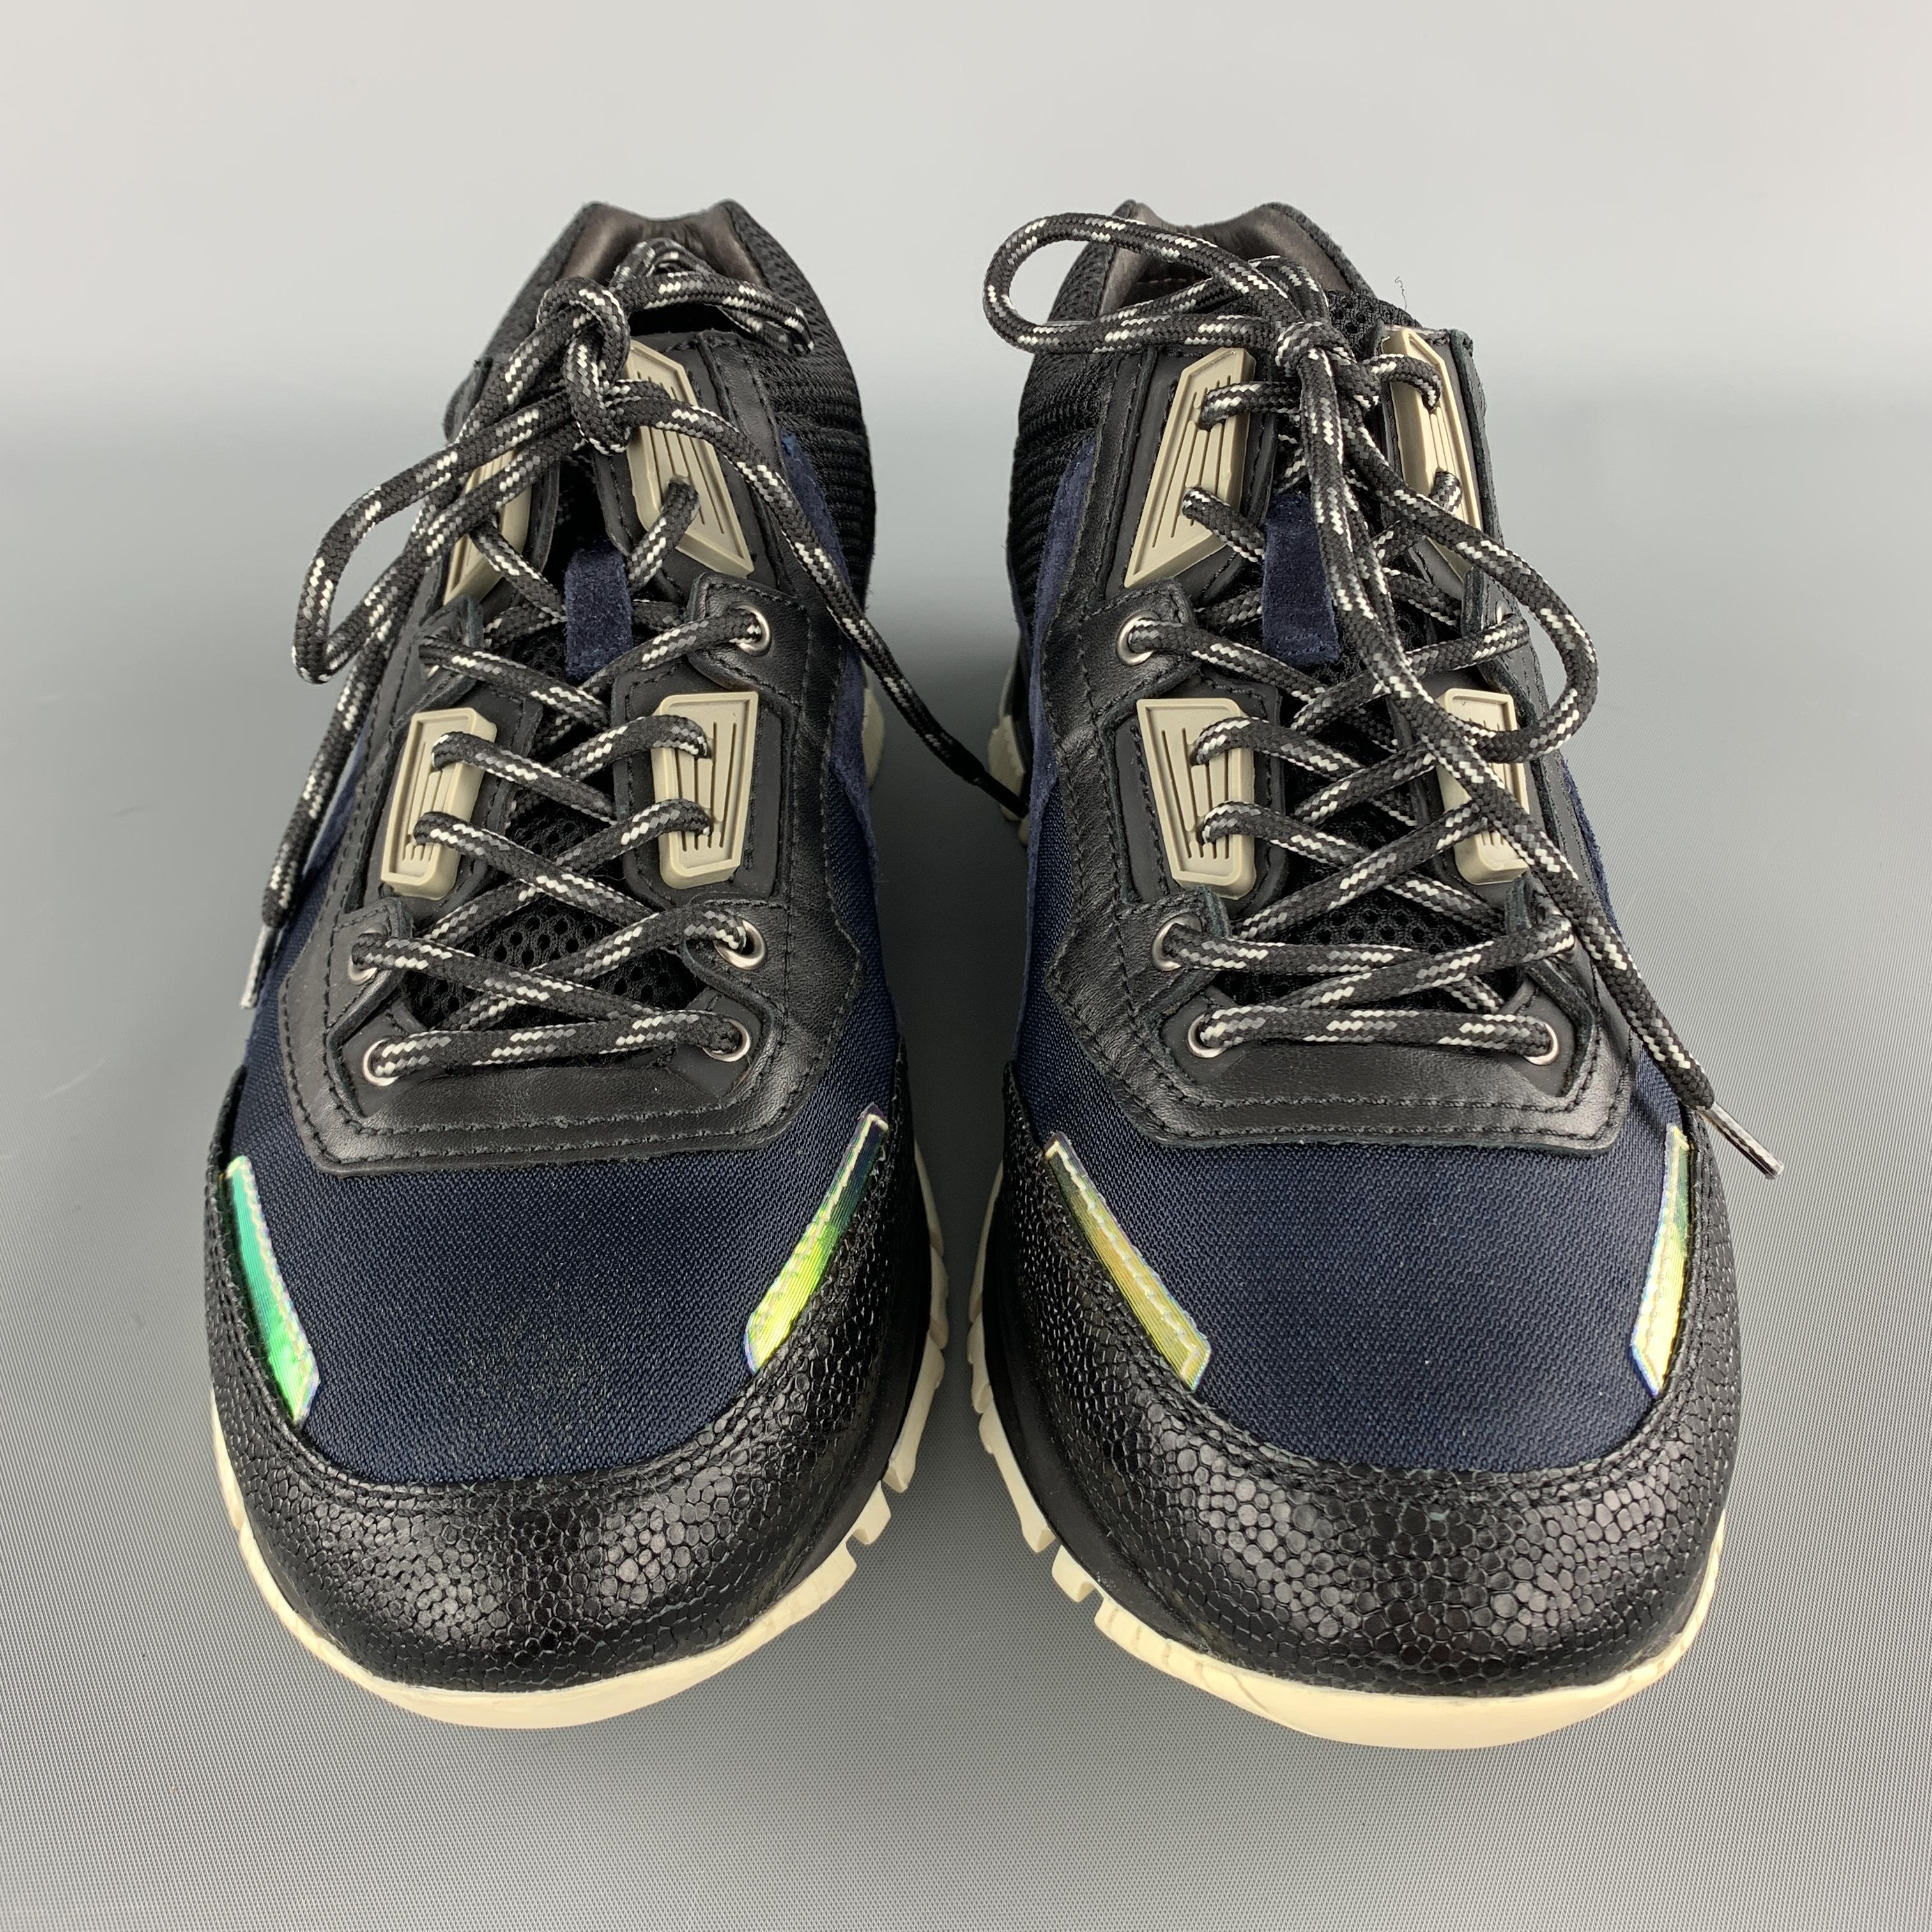 LANVIN sneakers come in navy textured mesh with black leather panels, neon iridescent stripes, and rubber sole. With box. Made in Italy 

Excellent Pre-Owned Condition.
Marked: UK 10

Outsole: 12 x 4.25 in.